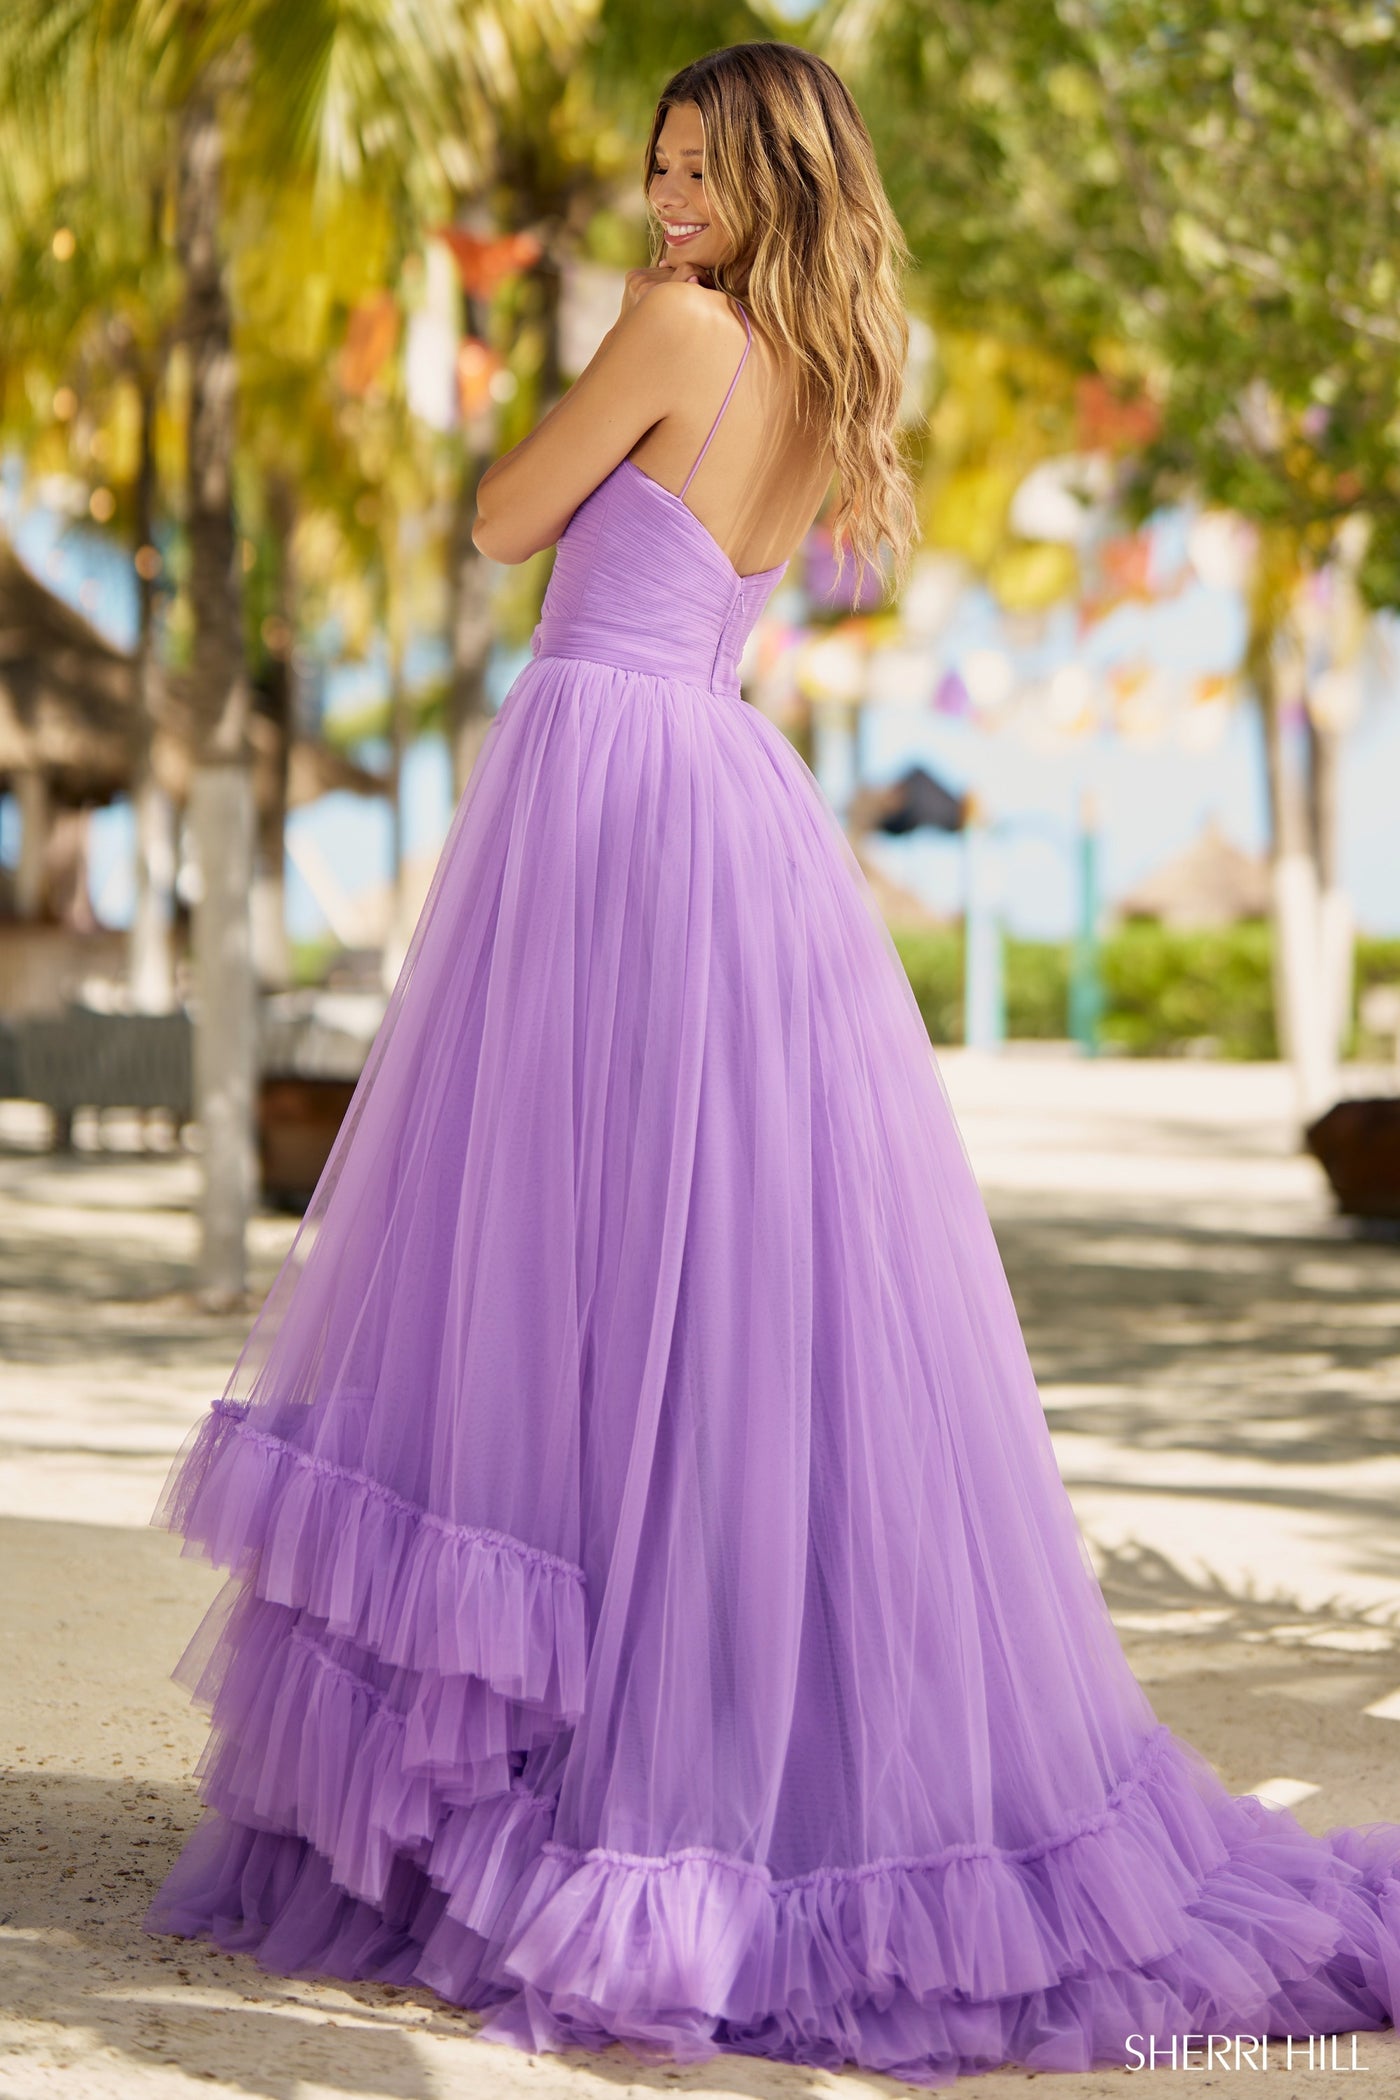 Sherri-Hill-55982-Sweetheart-Neckline-A-line-Gown-Tulle-Fabric-Lilac-Long-Dress-Evening-Gown-Prom-Dress-Sherri-Hill-2024